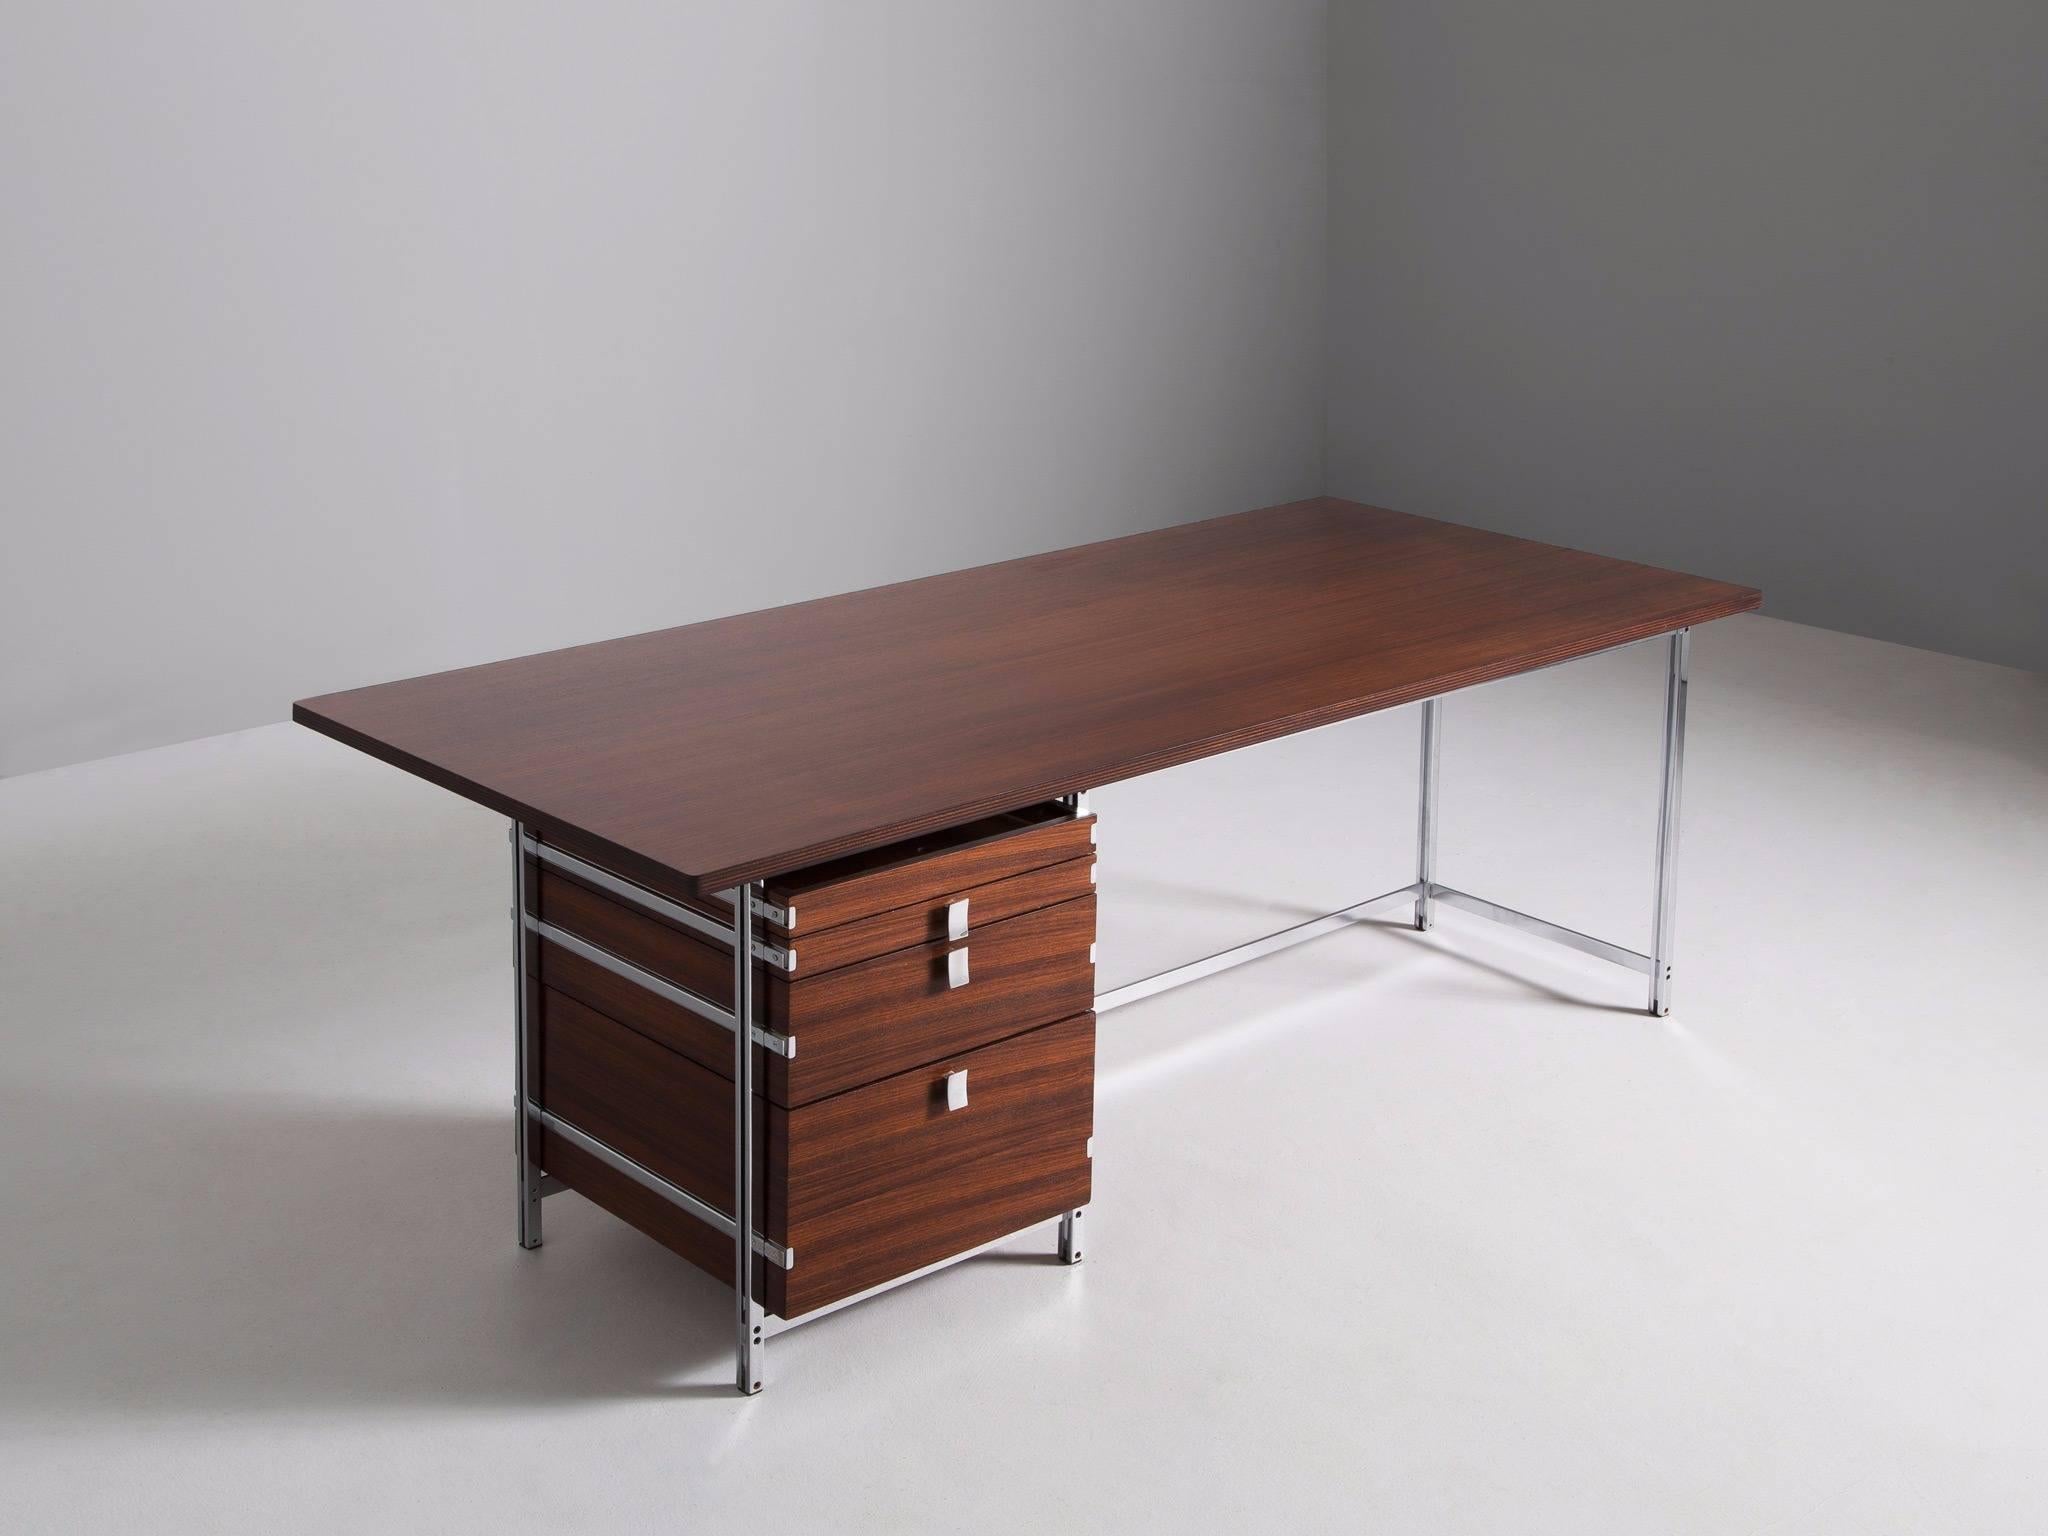 Set of two desks, in rosewood and chrome by Jules Wabbes for Mobilier Universel, Belgium, 1960s.

Set of two desks by Jules Wabbes. These items are in excellent restored condition, with minor signs of age visible. These desks, with a solid chromed